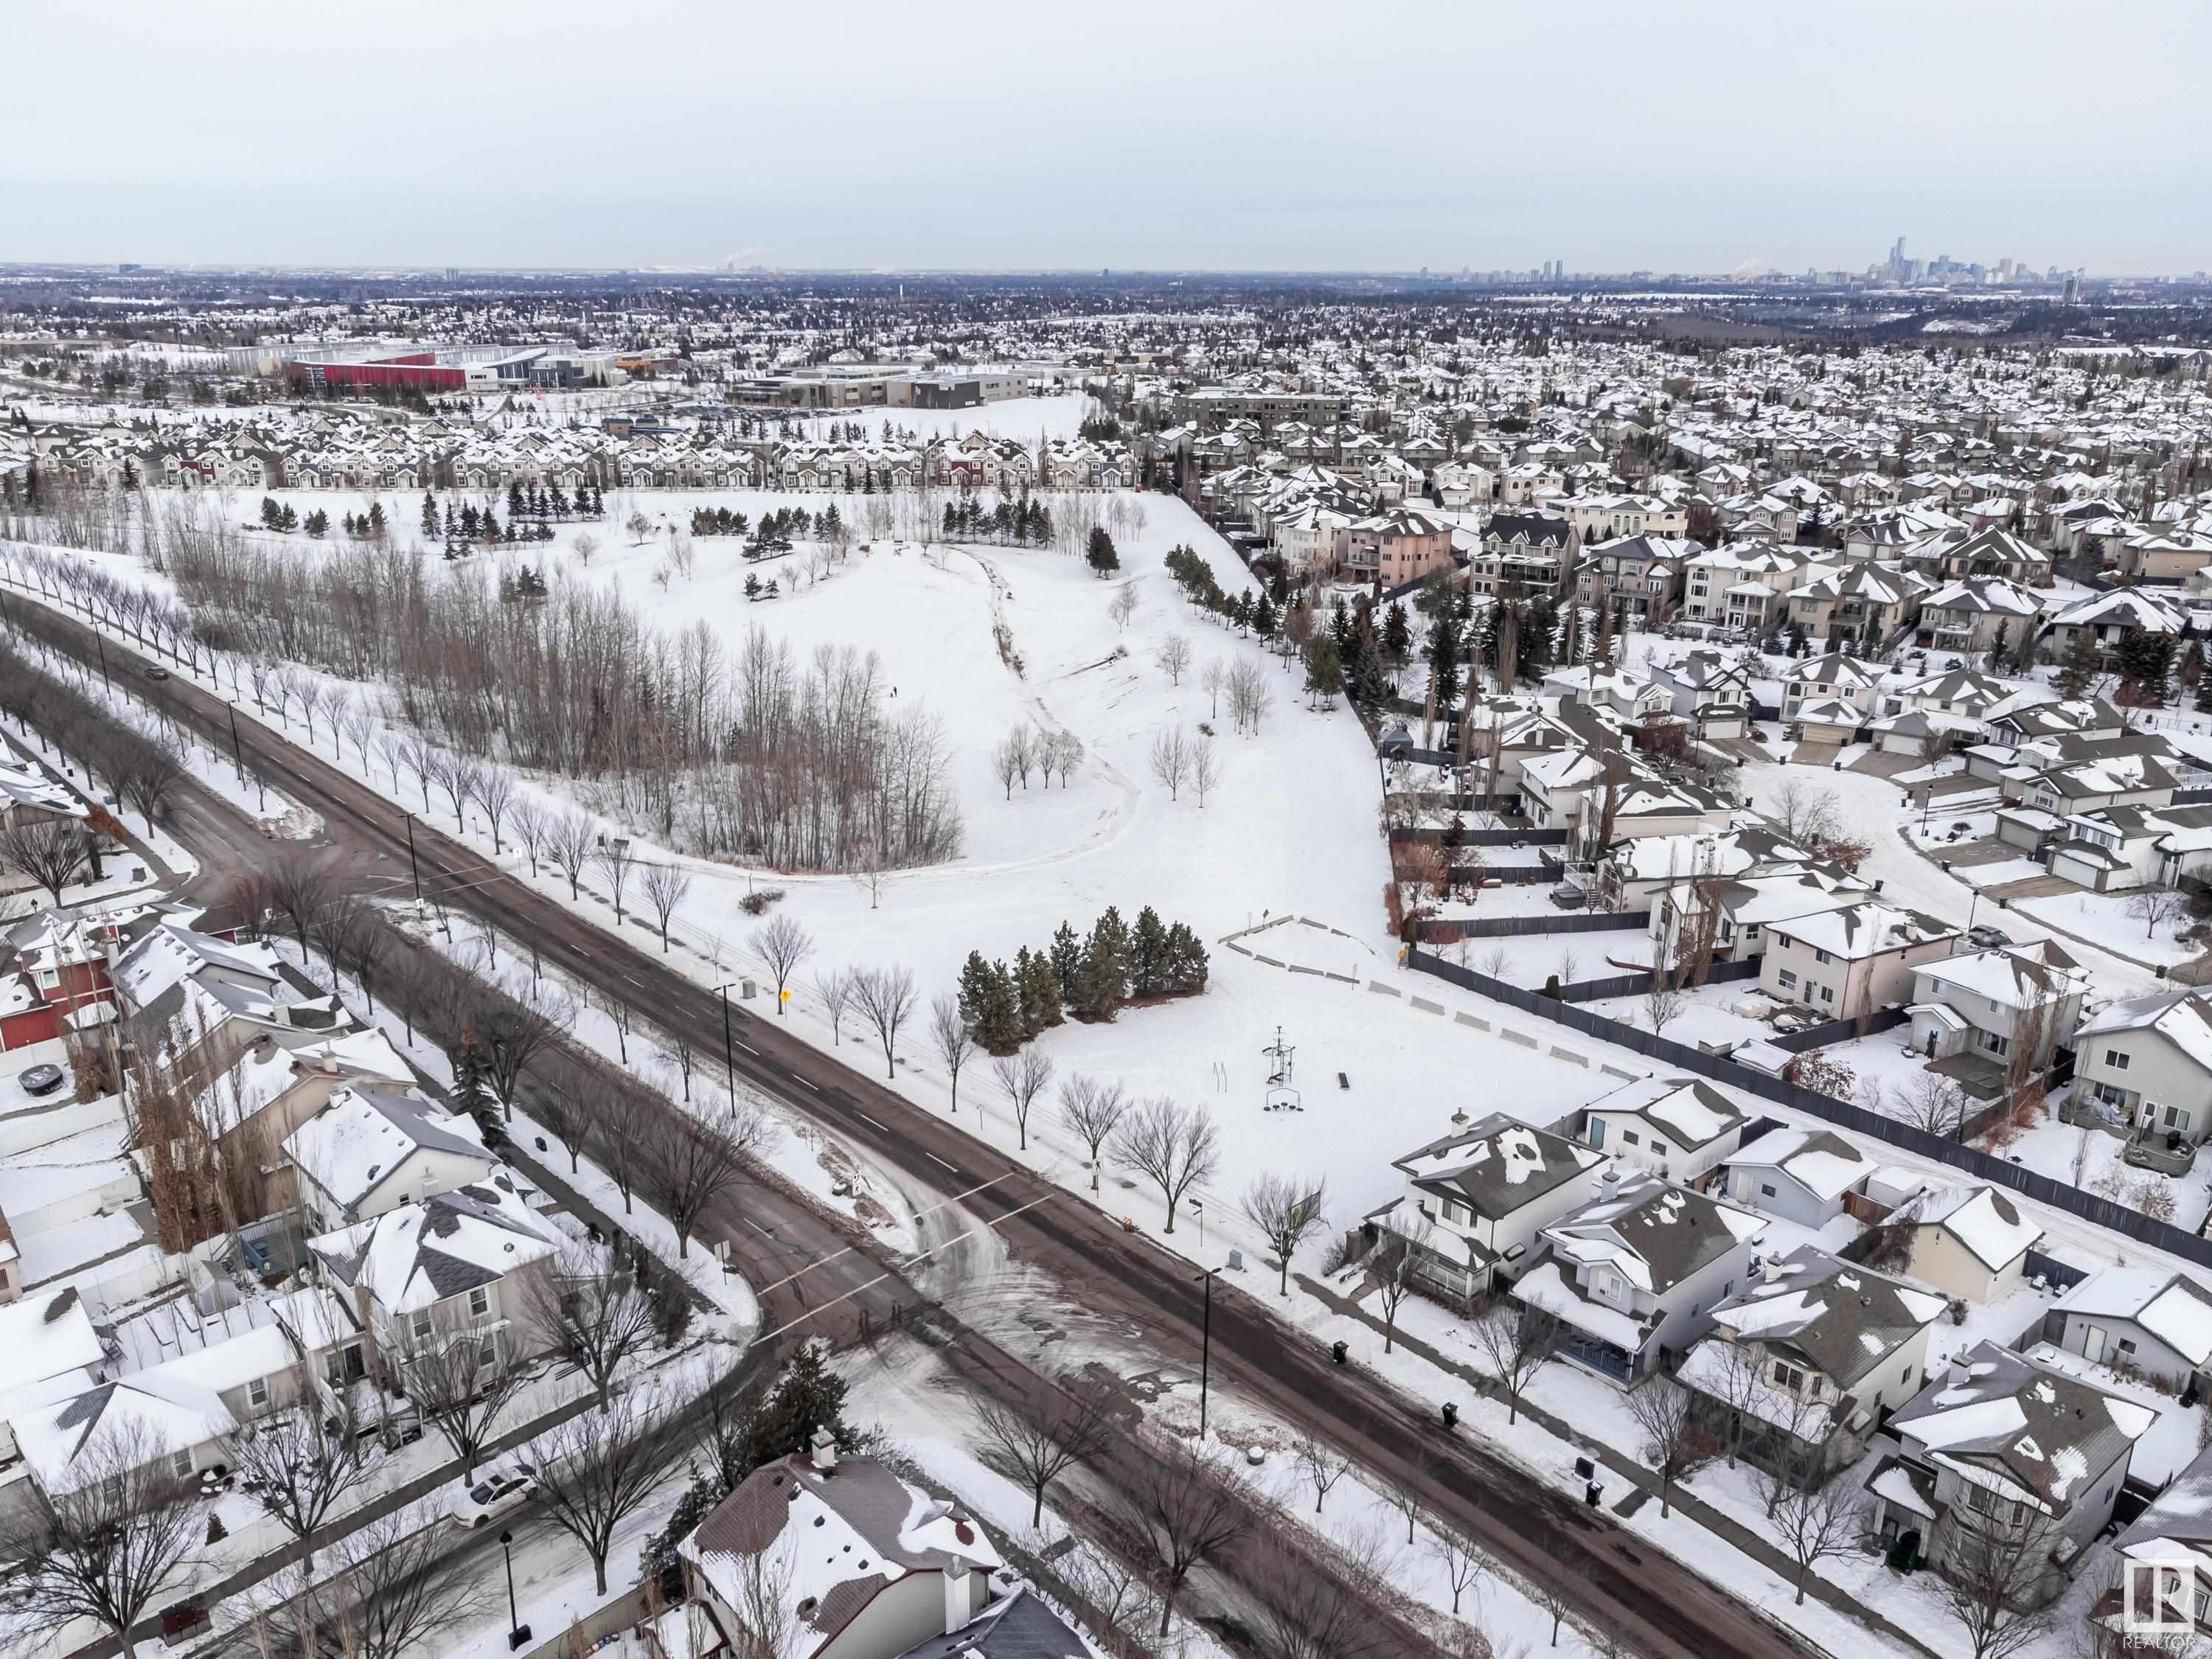      1882 TOWNE CENTRE BV NW , Edmonton,  ,T6R 3A2 ;  Listing Number: MLS E4330641